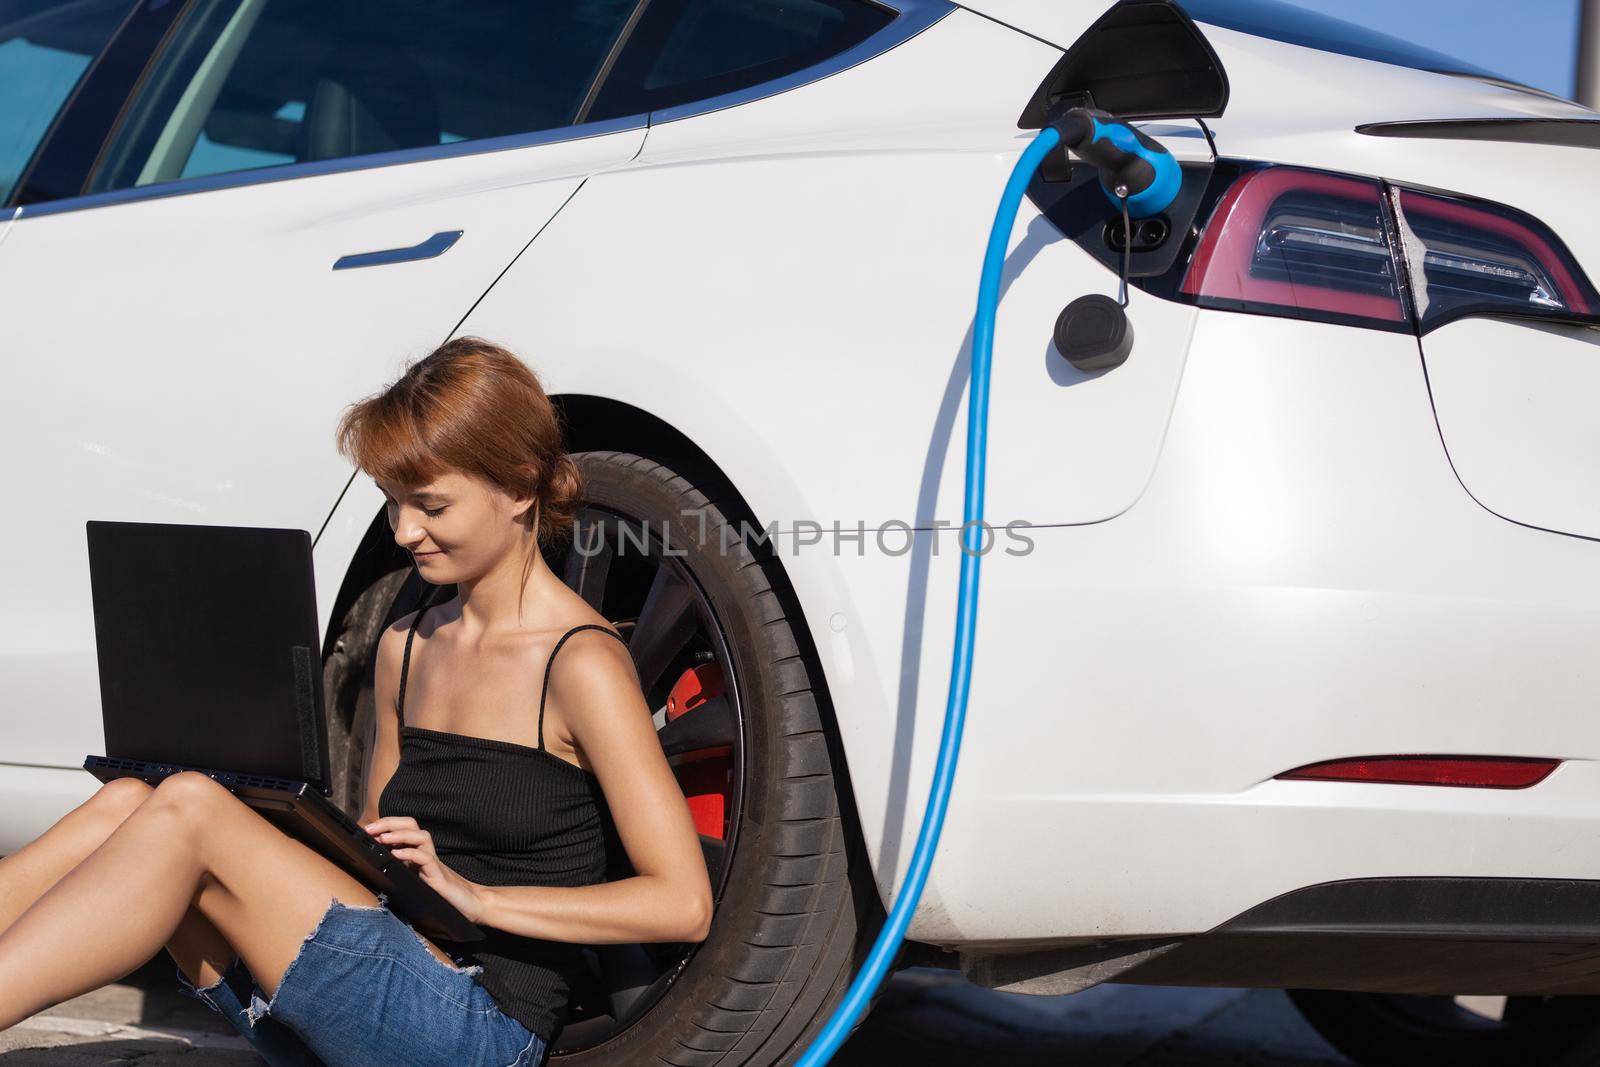 Girl waiting on the ground while her electric car is charging. Working on a laptop computer.